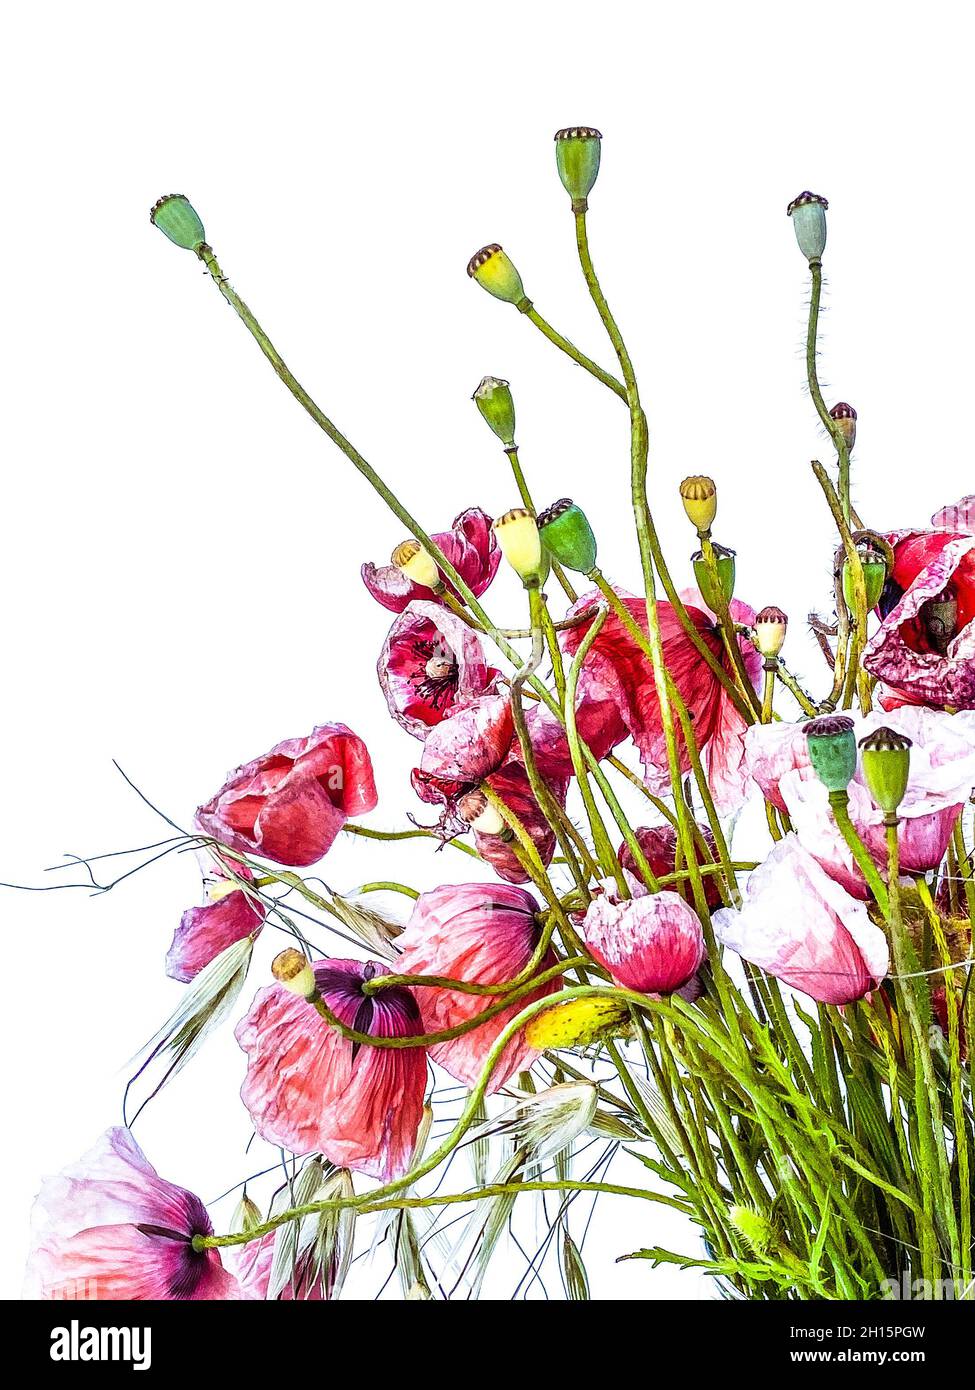 Mixed wild flowers bouquet, grasses and Poppies, in a glass vase. Stock Photo